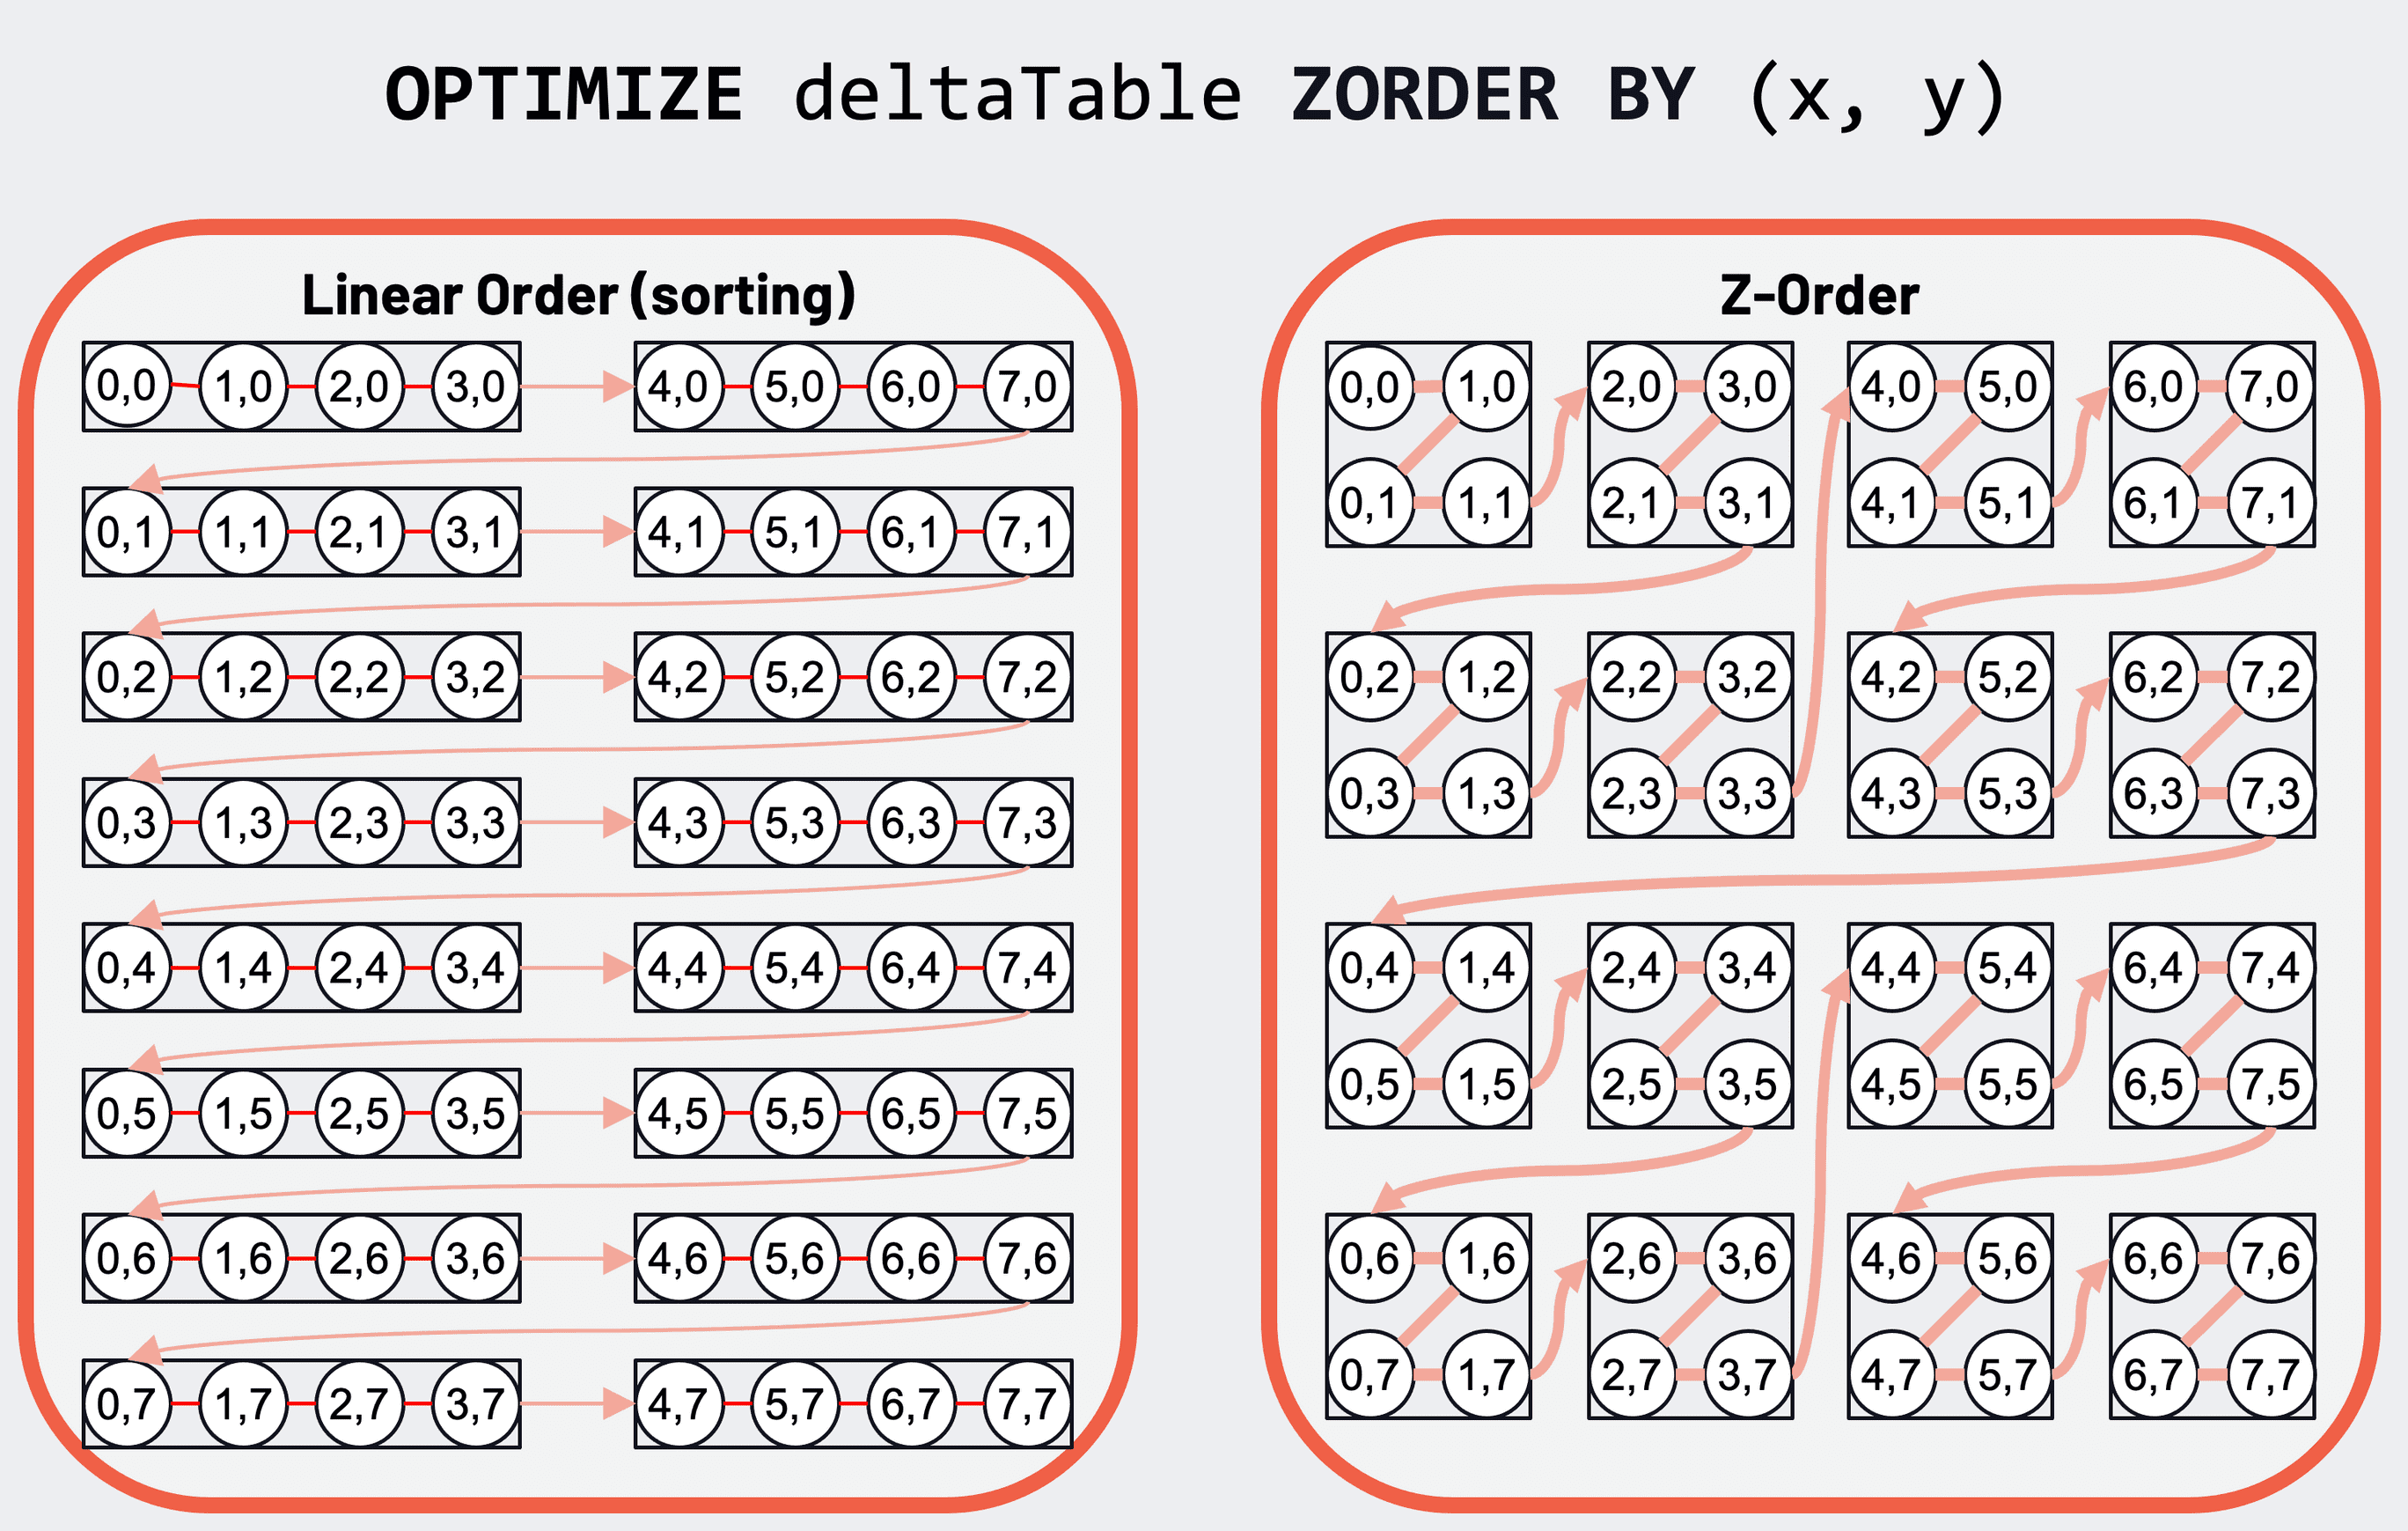 Optimize deltaTable ZORDER BY (x, y)